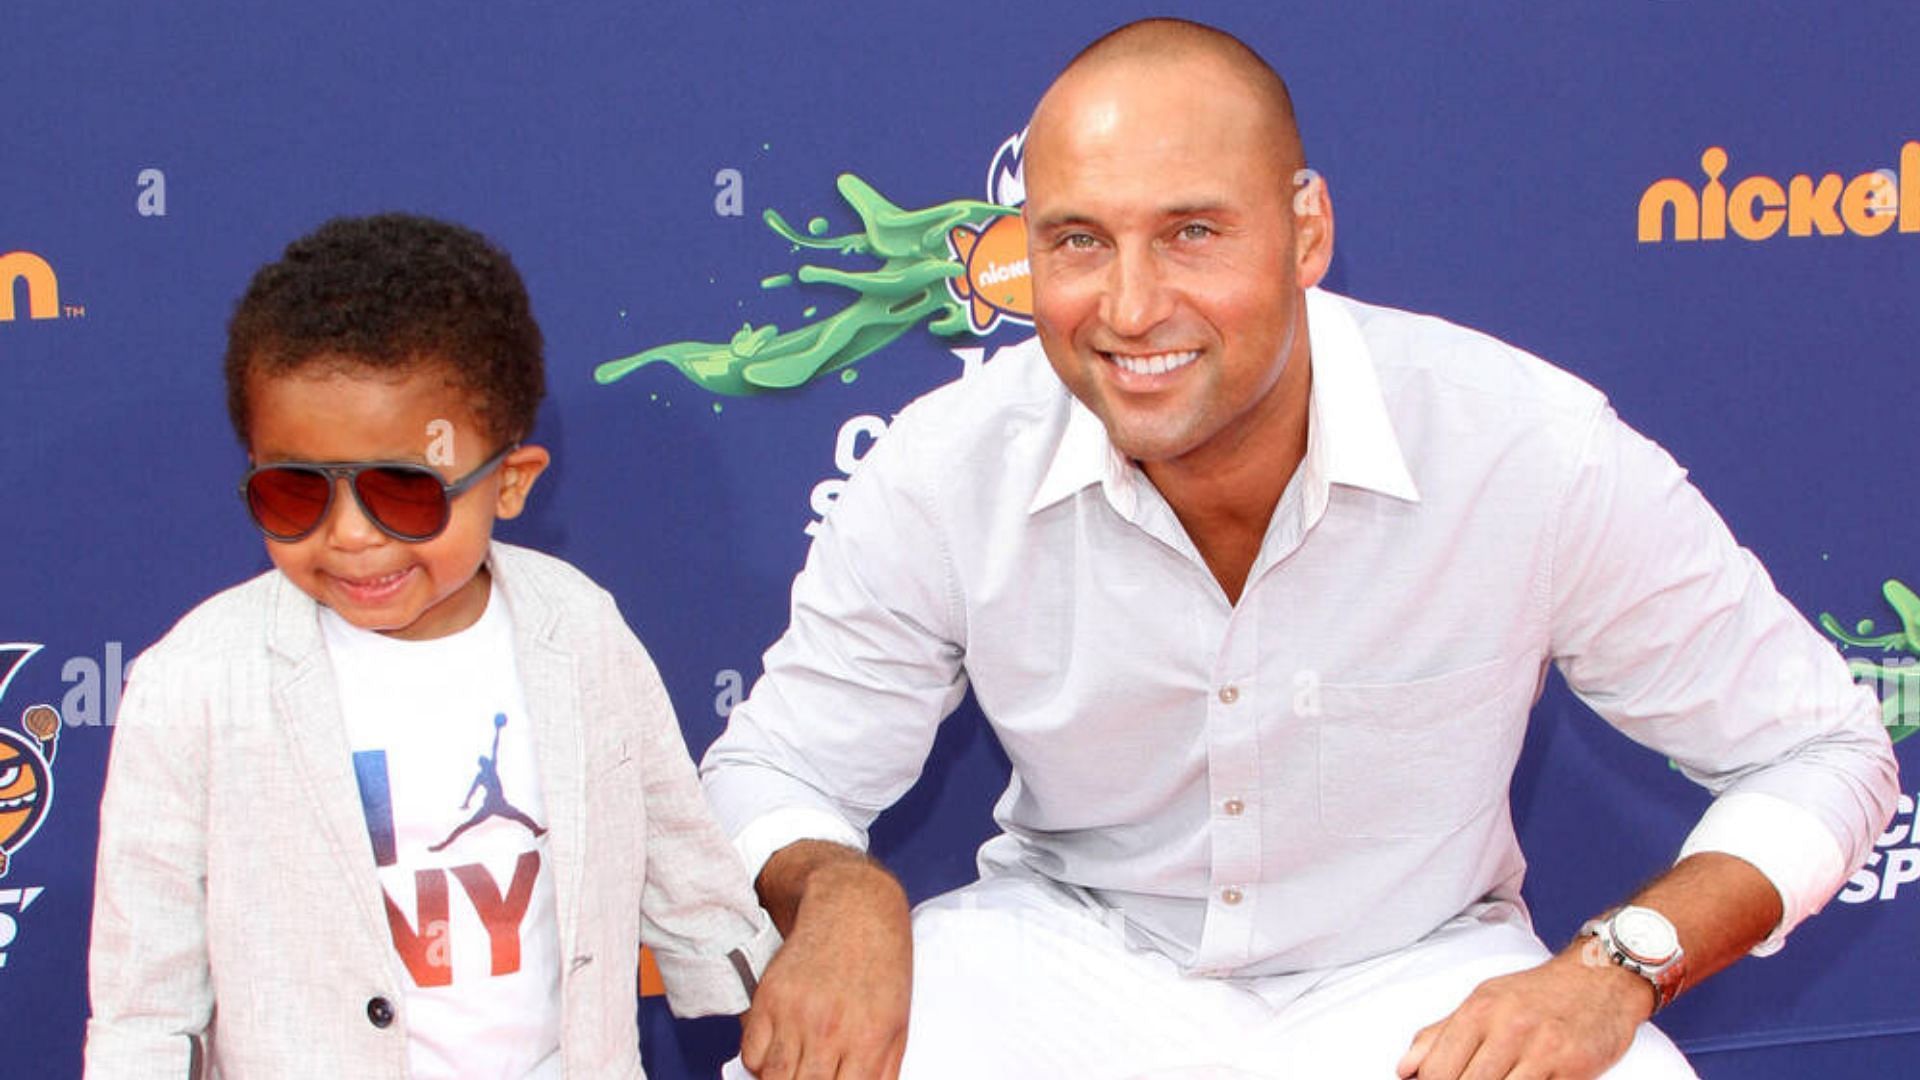 Derek jeter: Derek Jeter's sister Sharlee Jeter beams as son jumps on first  pitch swing, reminiscent of famous uncle: “I wonder where he got that from…”